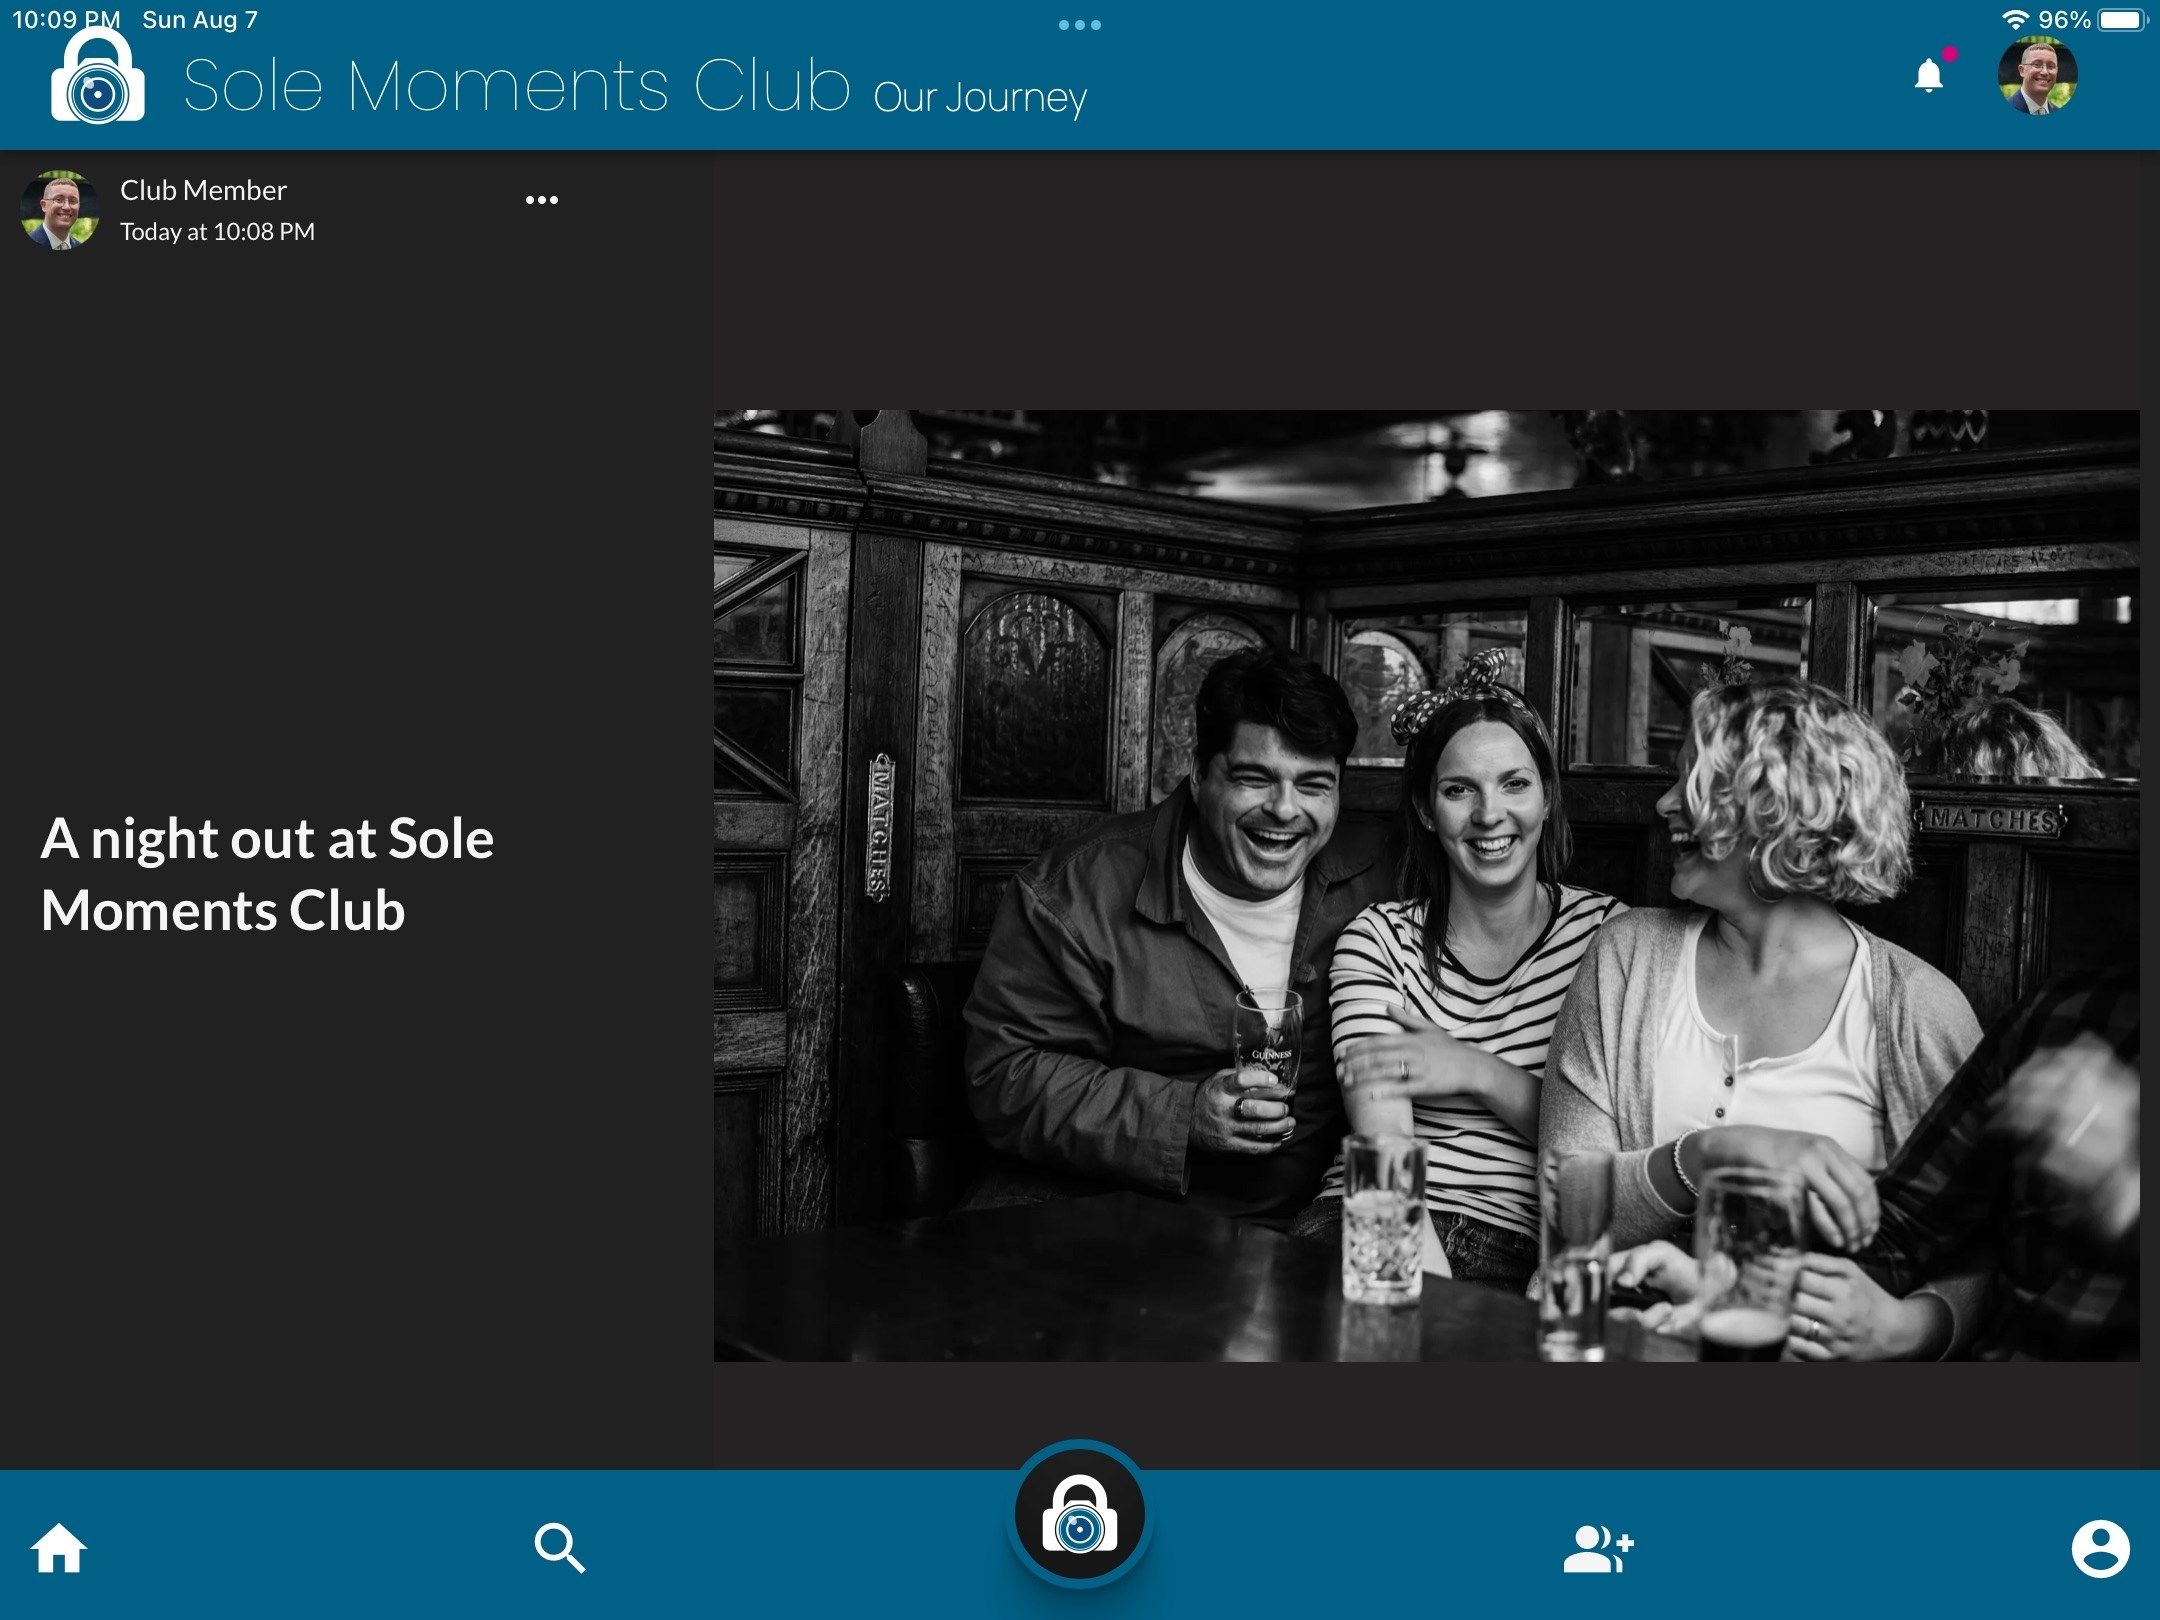 Sole Moments Club